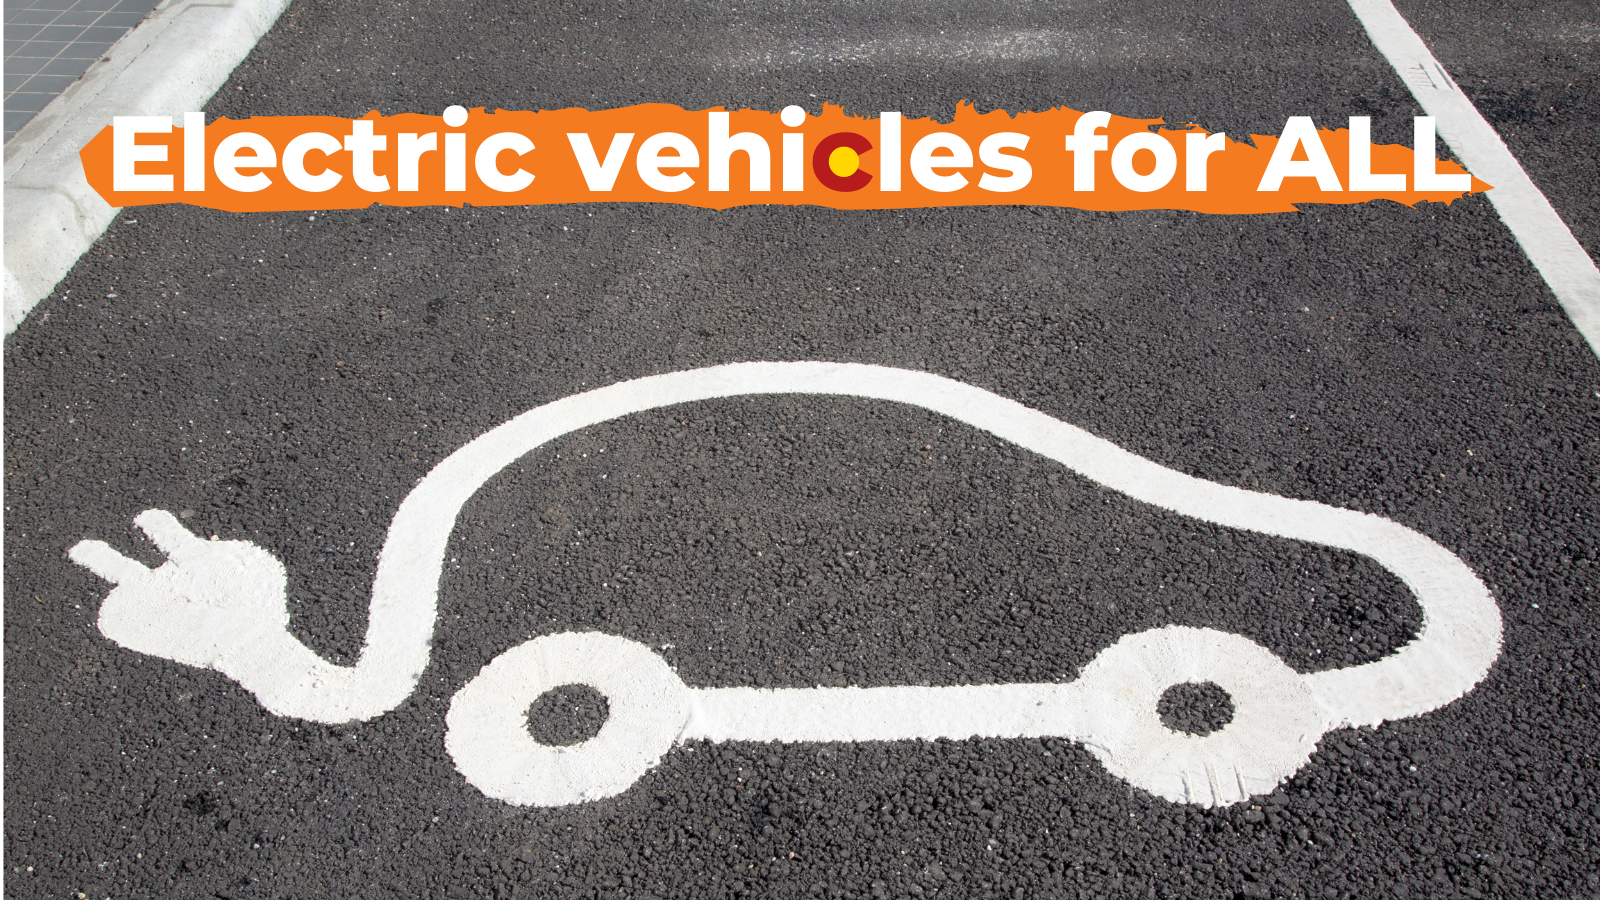 Speak Out For Electric Vehicles For All